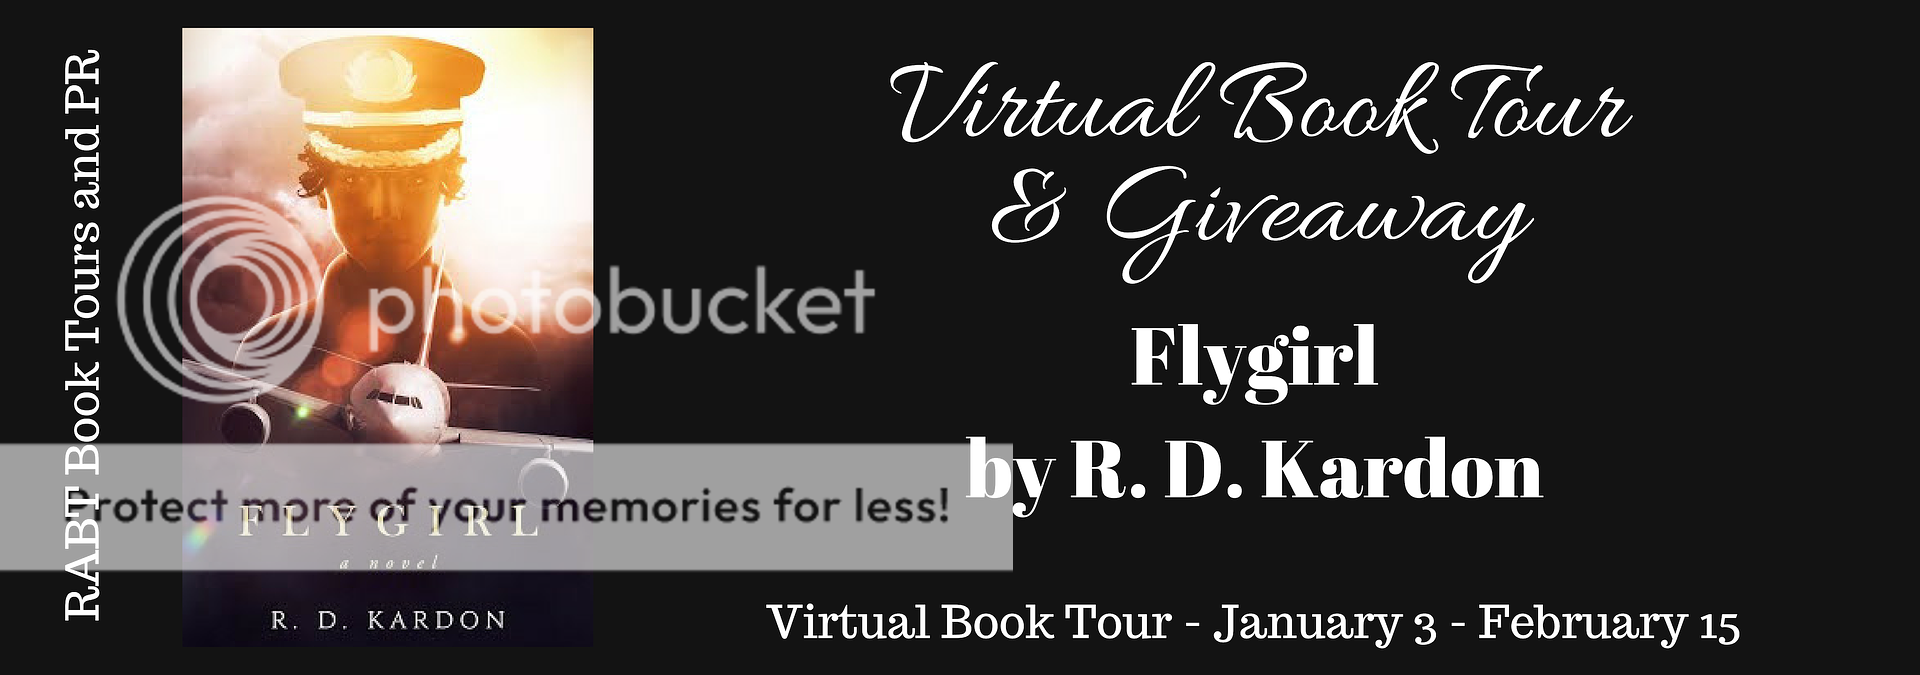 Virtual Book Tour: Flygirl by R.D. Kardon @rdkardonauthor with a #interview and #giveaway for the #womensfiction #novel @RABTBookTours